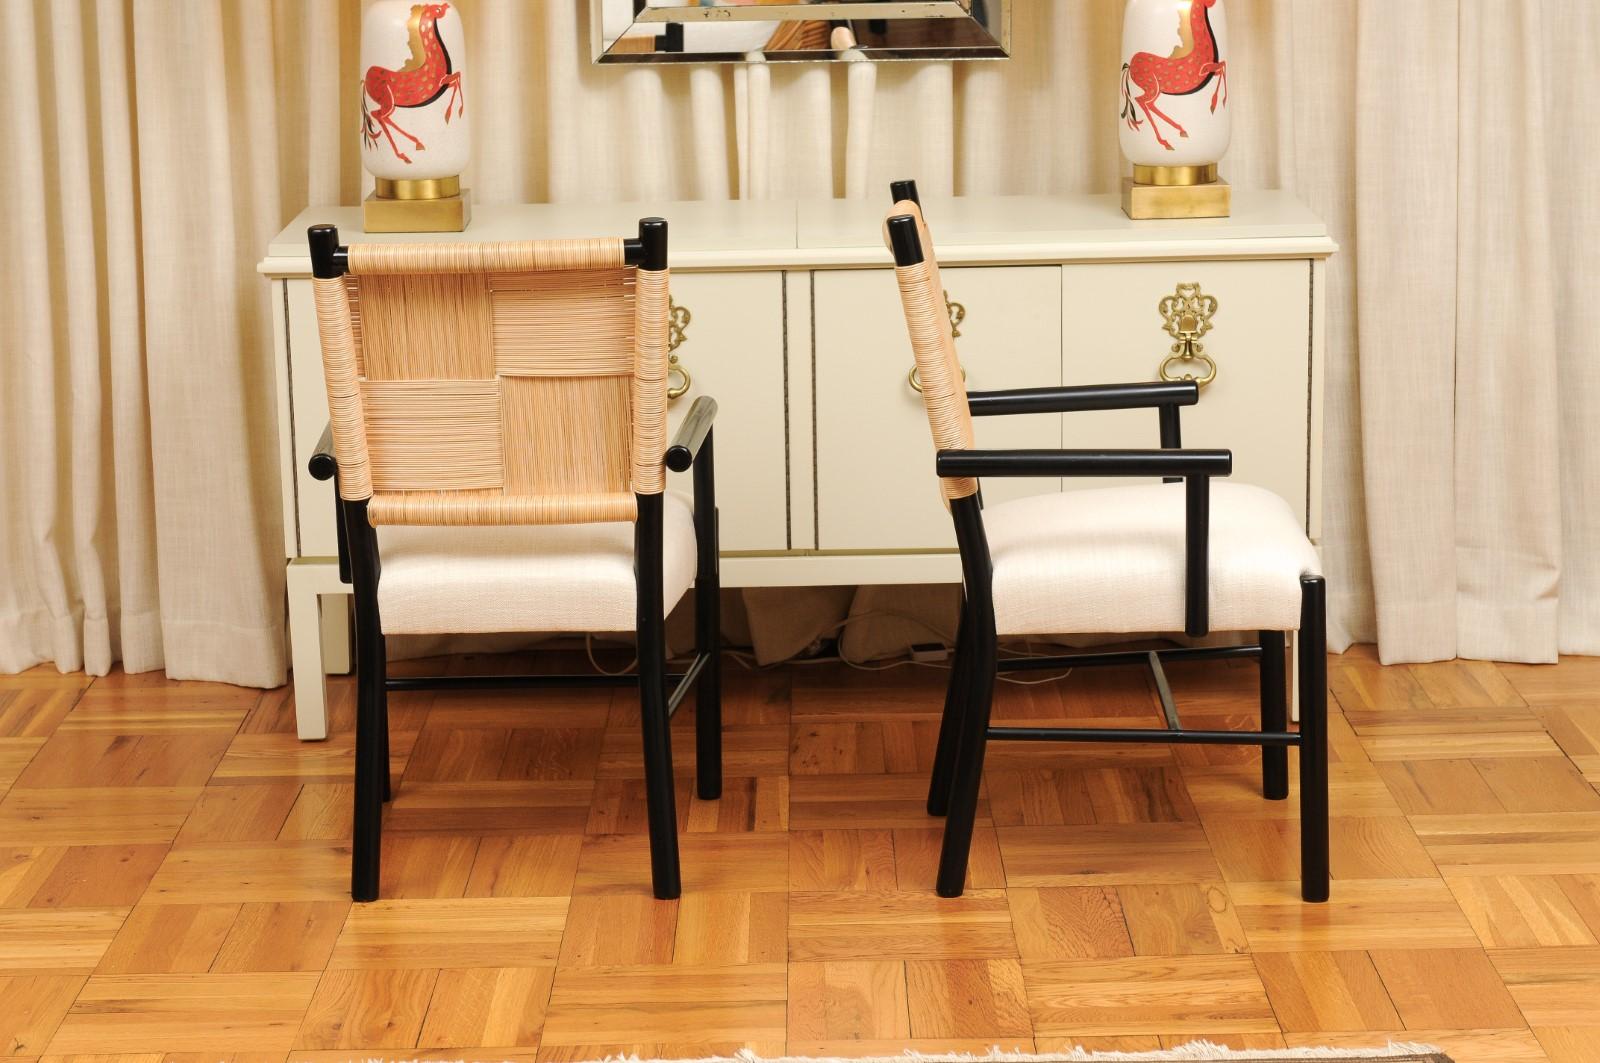 All Arms- Sublime Set of 14 Cane Back Dining Chairs by John Hutton for Donghia For Sale 4